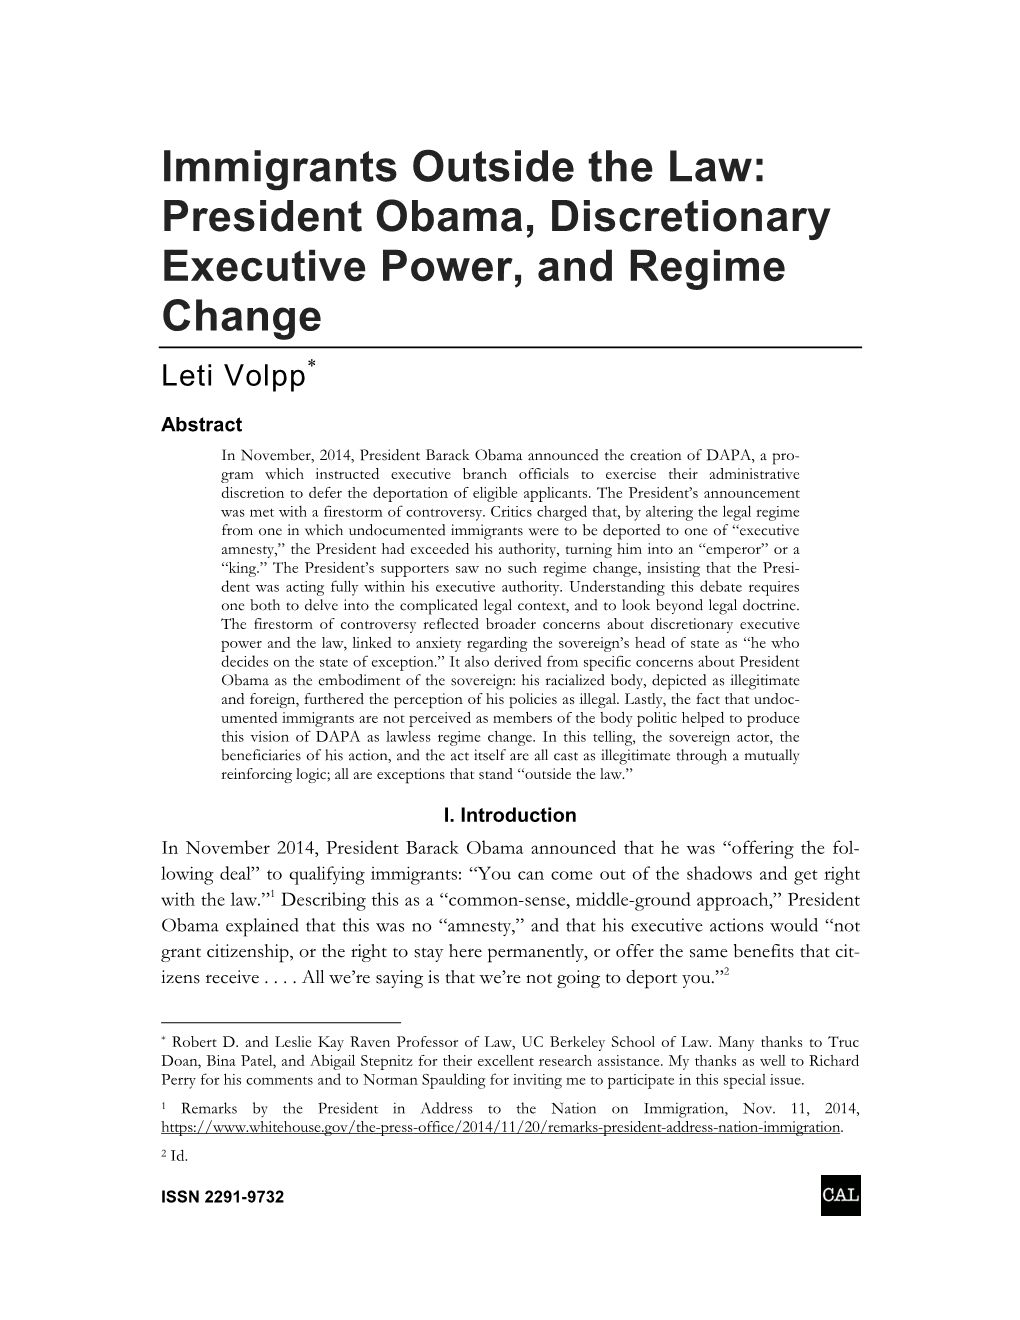 Immigrants Outside the Law: President Obama, Discretionary Executive Power, and Regime Change Leti Volpp*